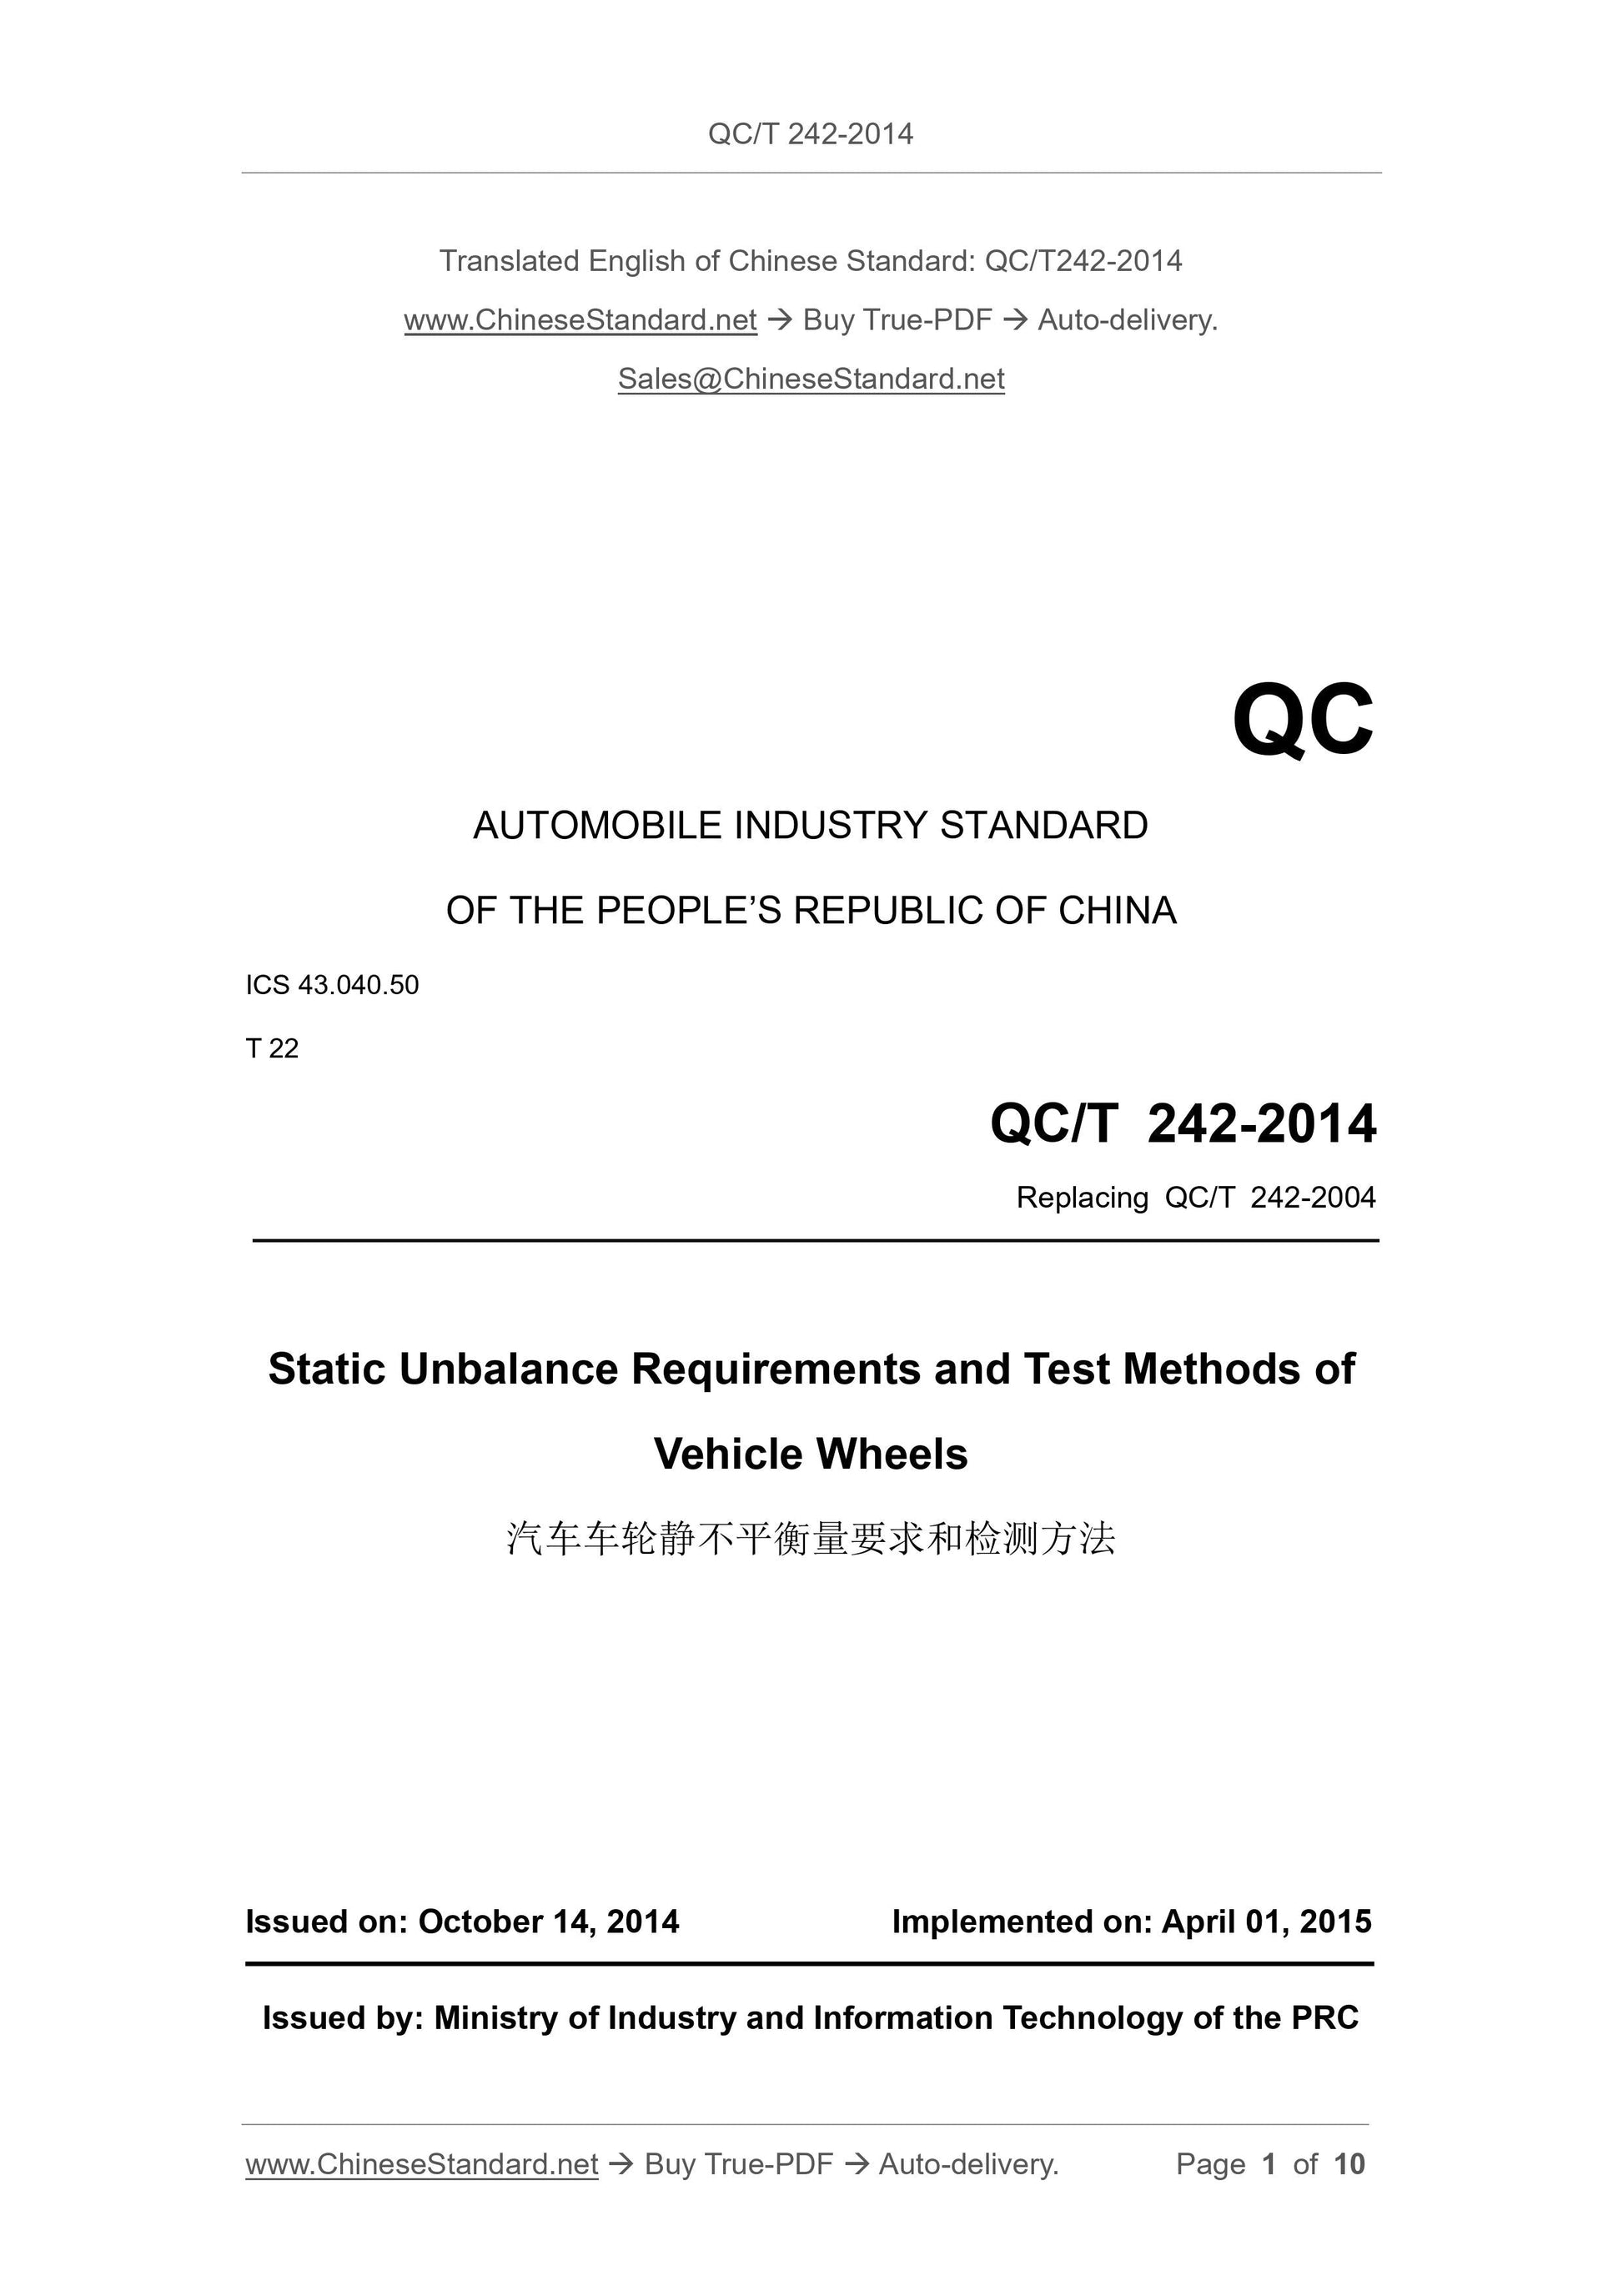 QC/T 242-2014 Page 1